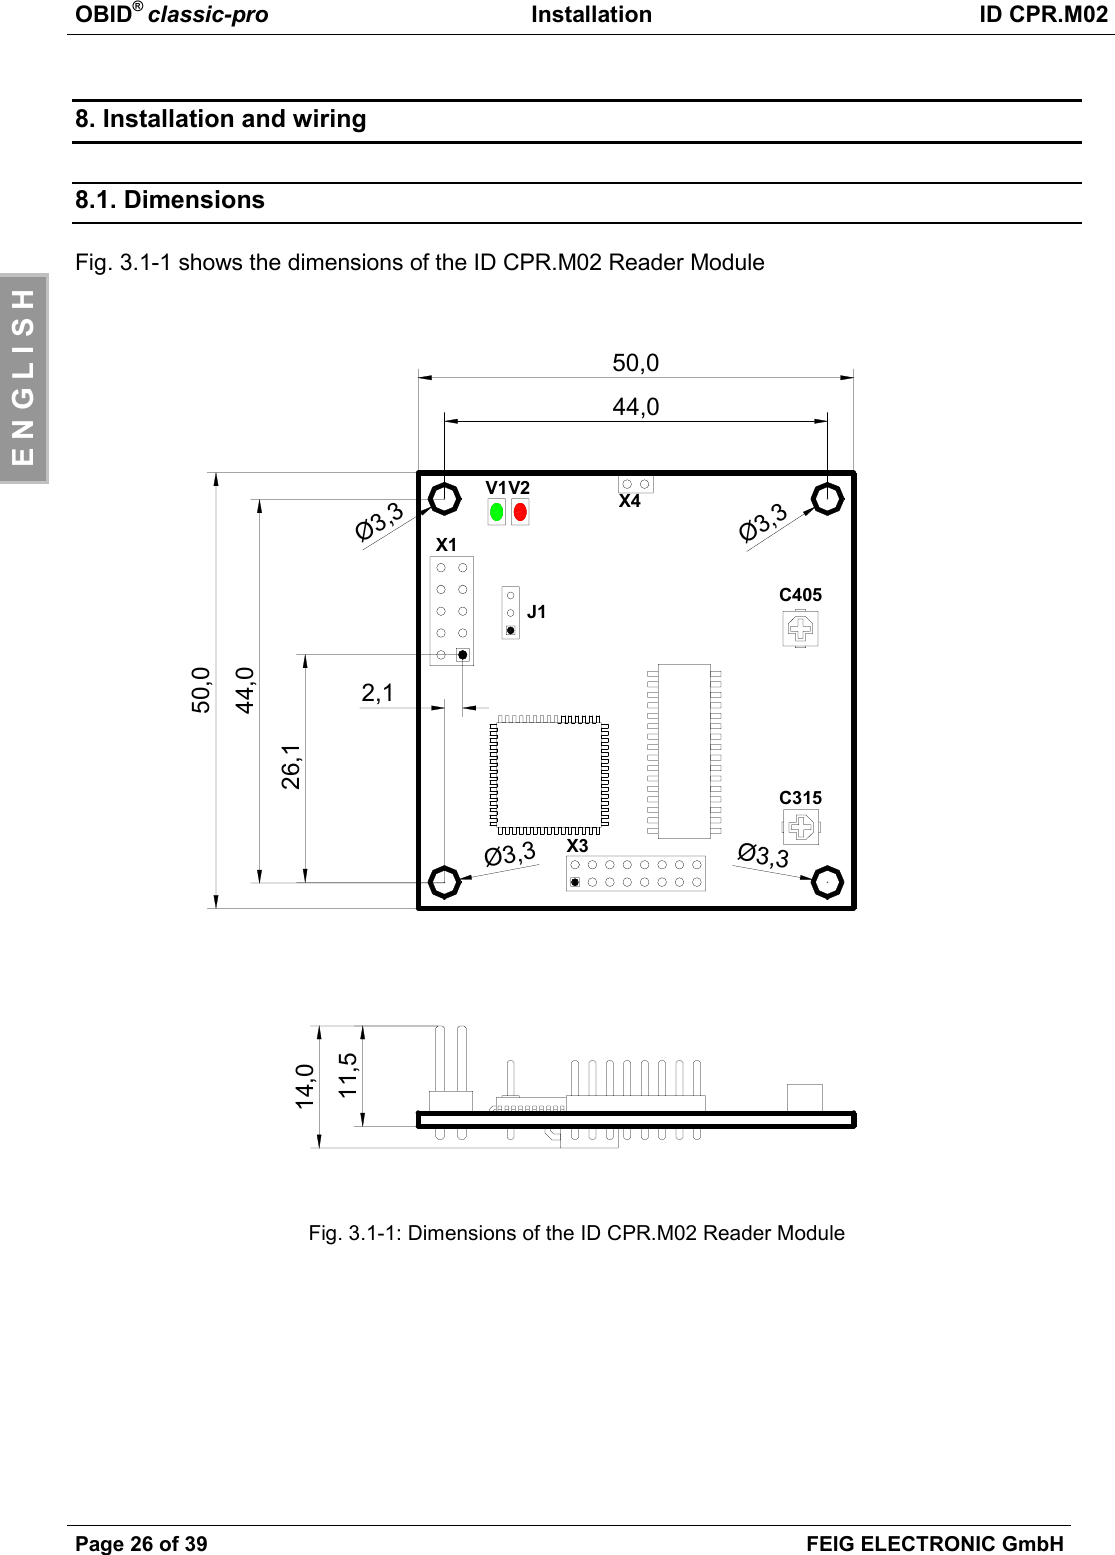 OBID® classic-pro Installation ID CPR.M02Page 26 of 39 FEIG ELECTRONIC GmbHE N G L I S H8. Installation and wiring8.1. DimensionsFig. 3.1-1 shows the dimensions of the ID CPR.M02 Reader ModuleFig. 3.1-1: Dimensions of the ID CPR.M02 Reader ModuleX1J1V2V1C31544,050,026,12,1Ø3,3Ø3,3Ø3,3Ø3,314,011,5X3X444,050,0C405